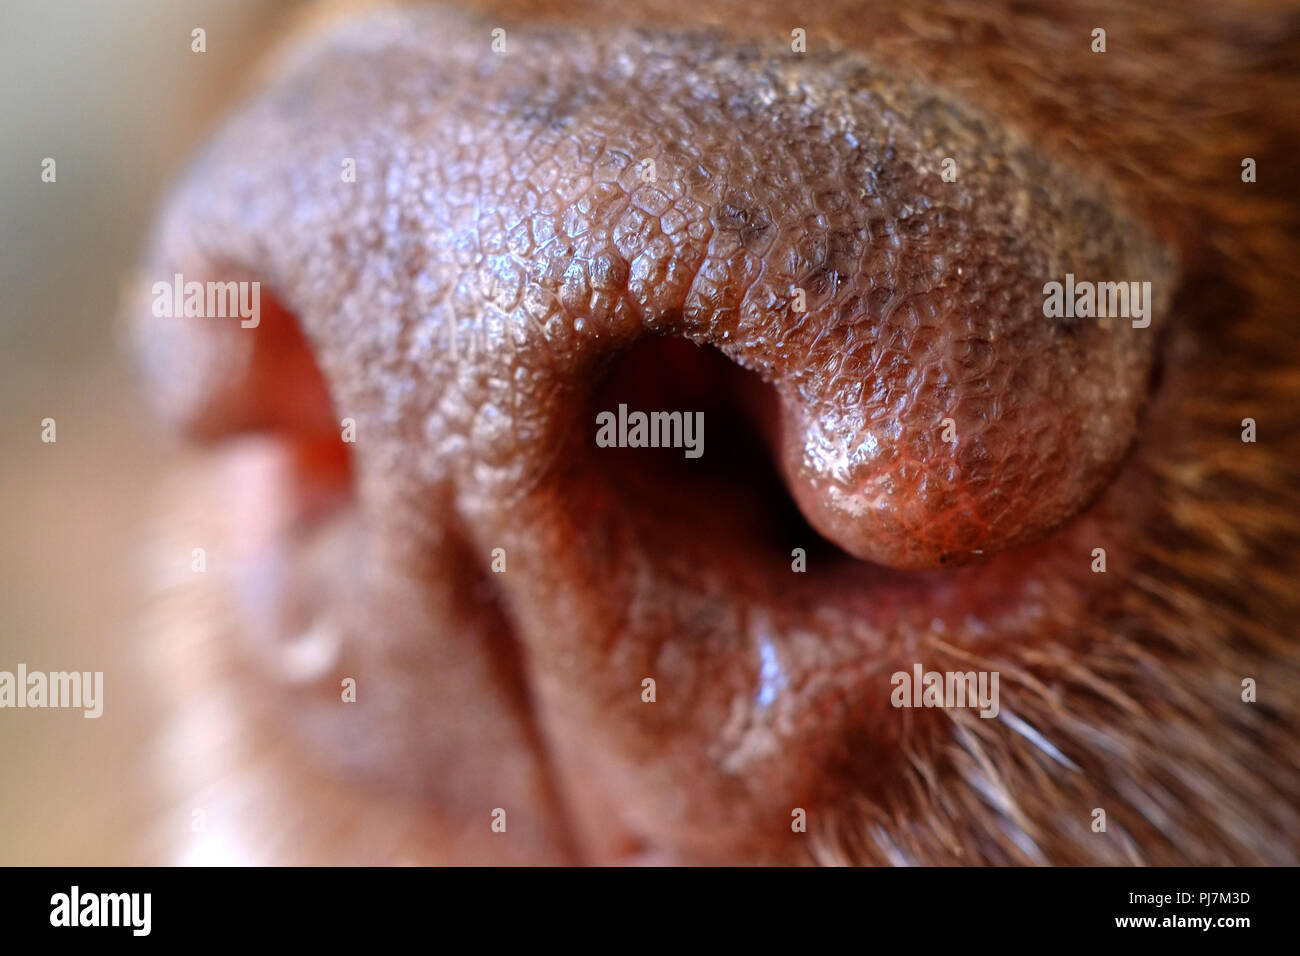 Close up of a dog's nose Stock Photo